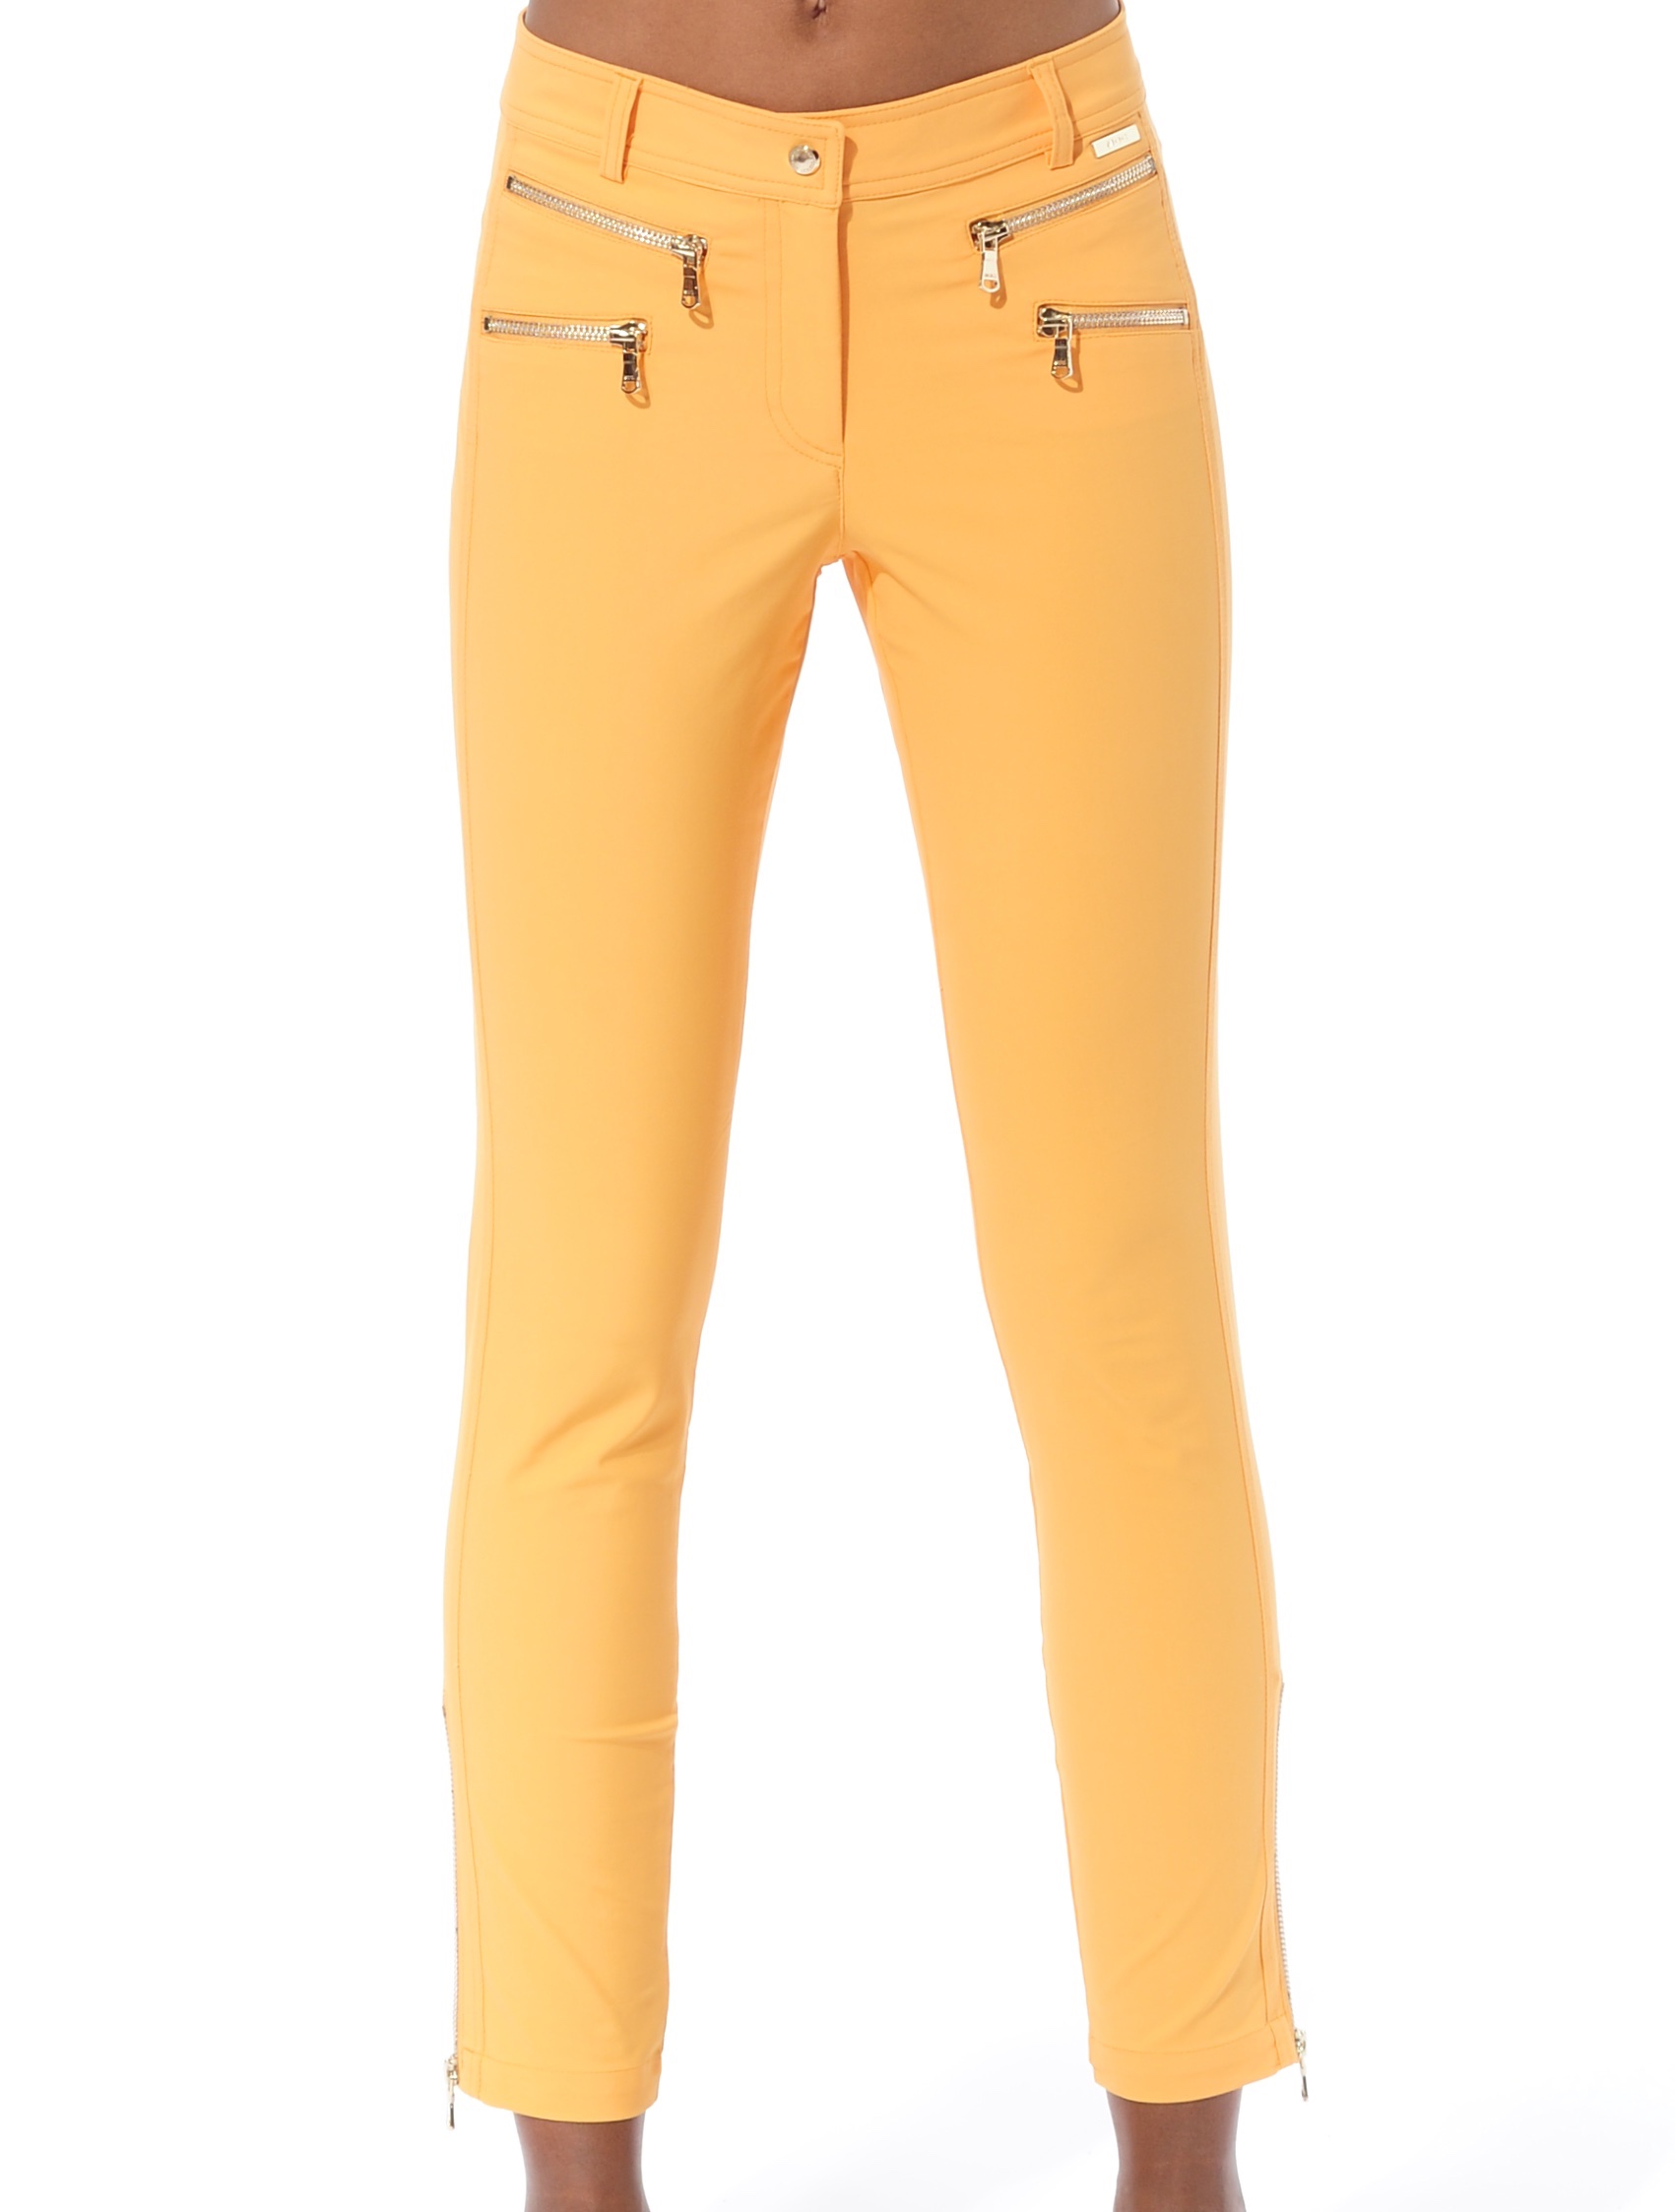 4way stretch double zip ankle pants apricot 